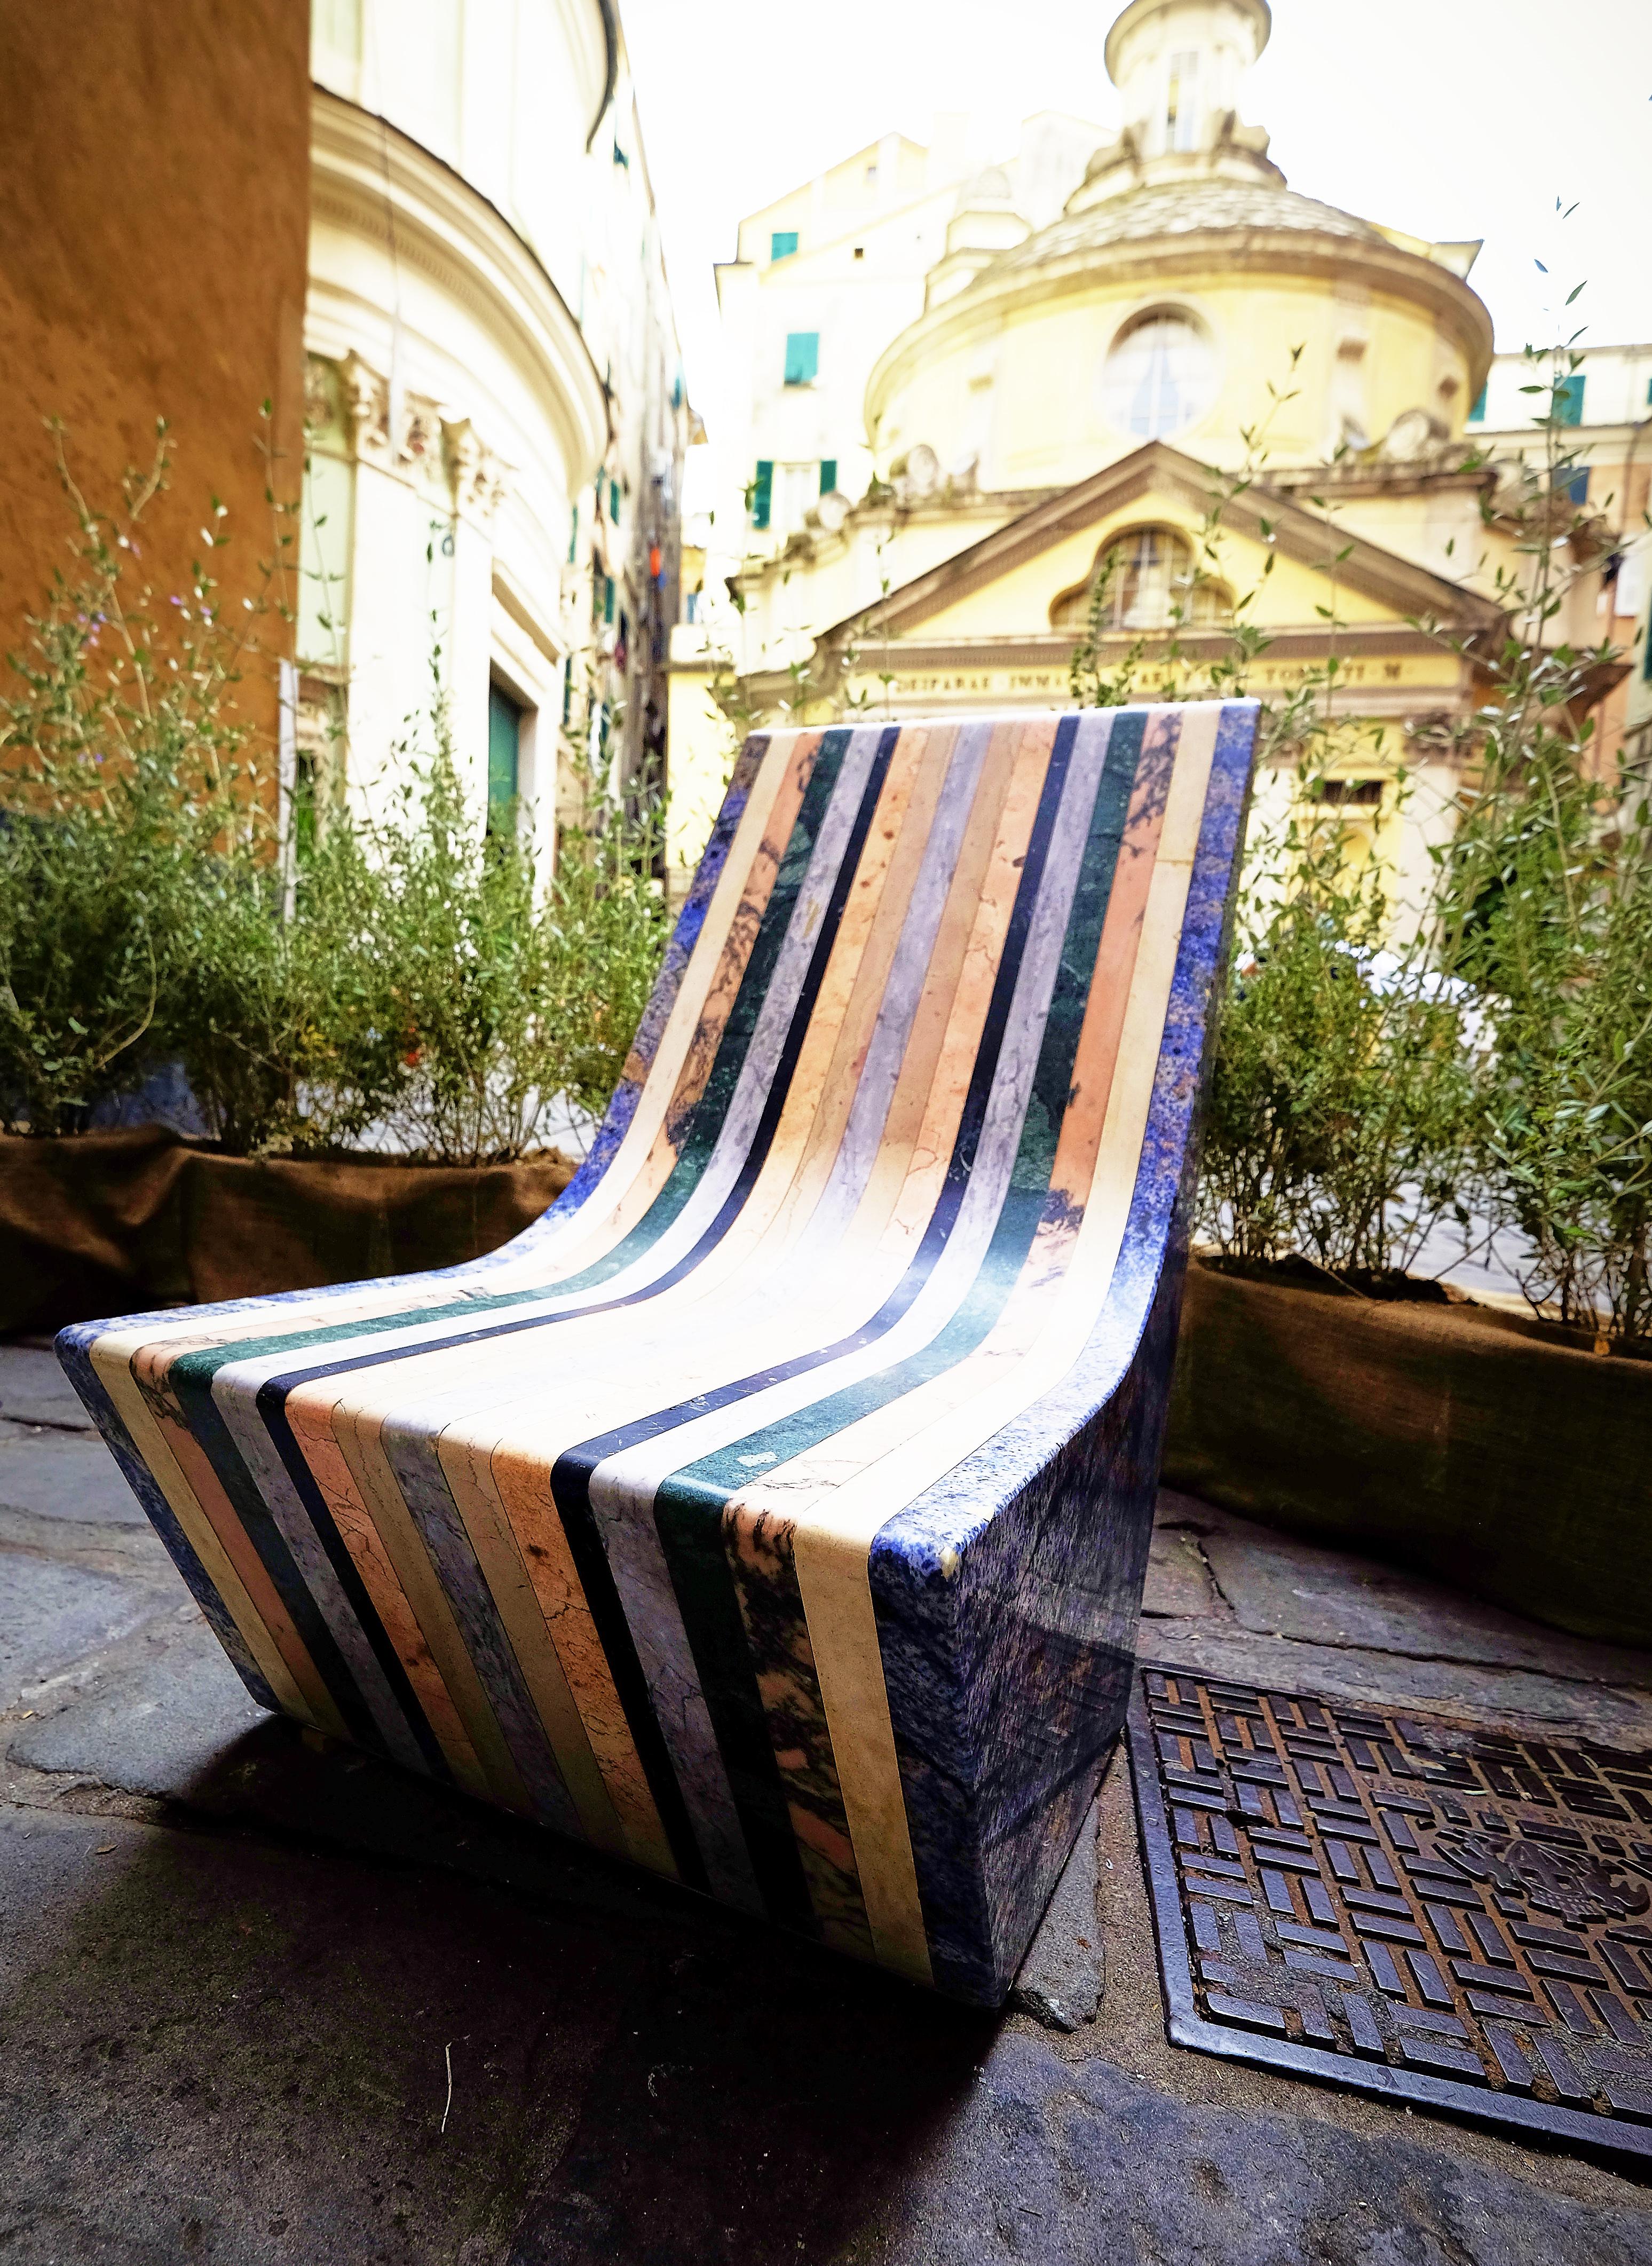 21st Century by M.Nocchi e A.Tazzini Recycled Polichrome Marble Bench Matrioska In New Condition For Sale In massa, IT